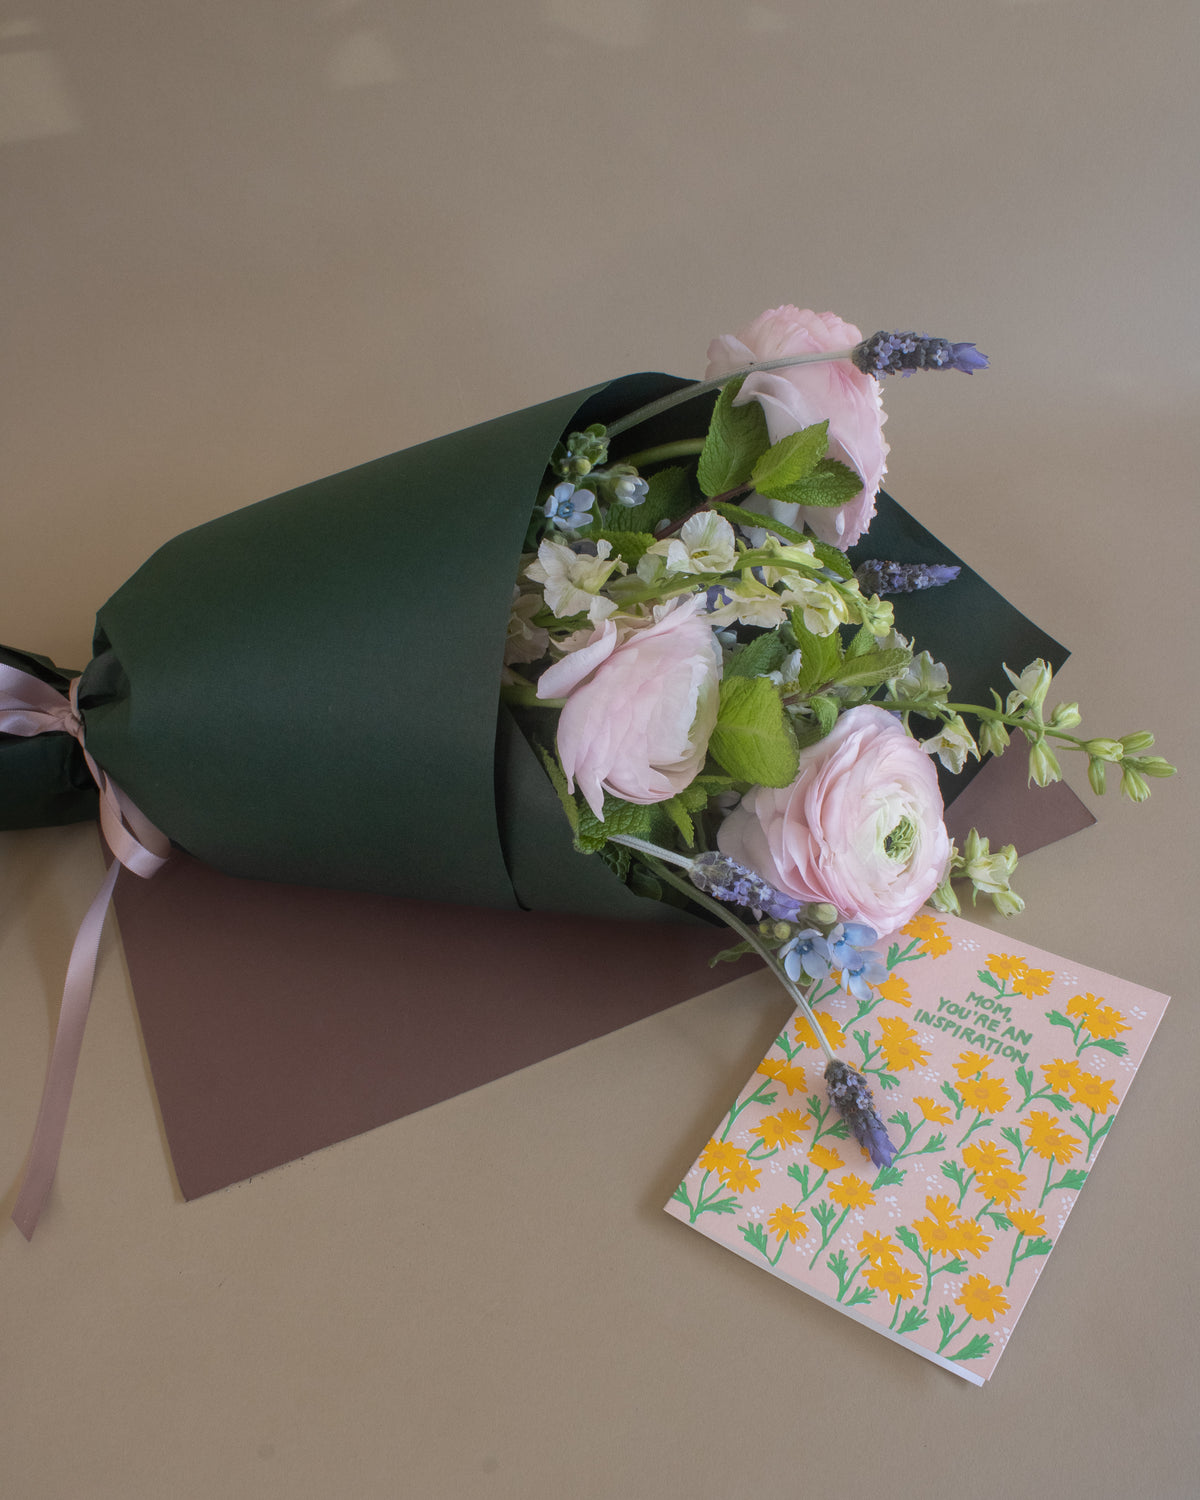 Mother's Day: The Spring Meadow Bouquet